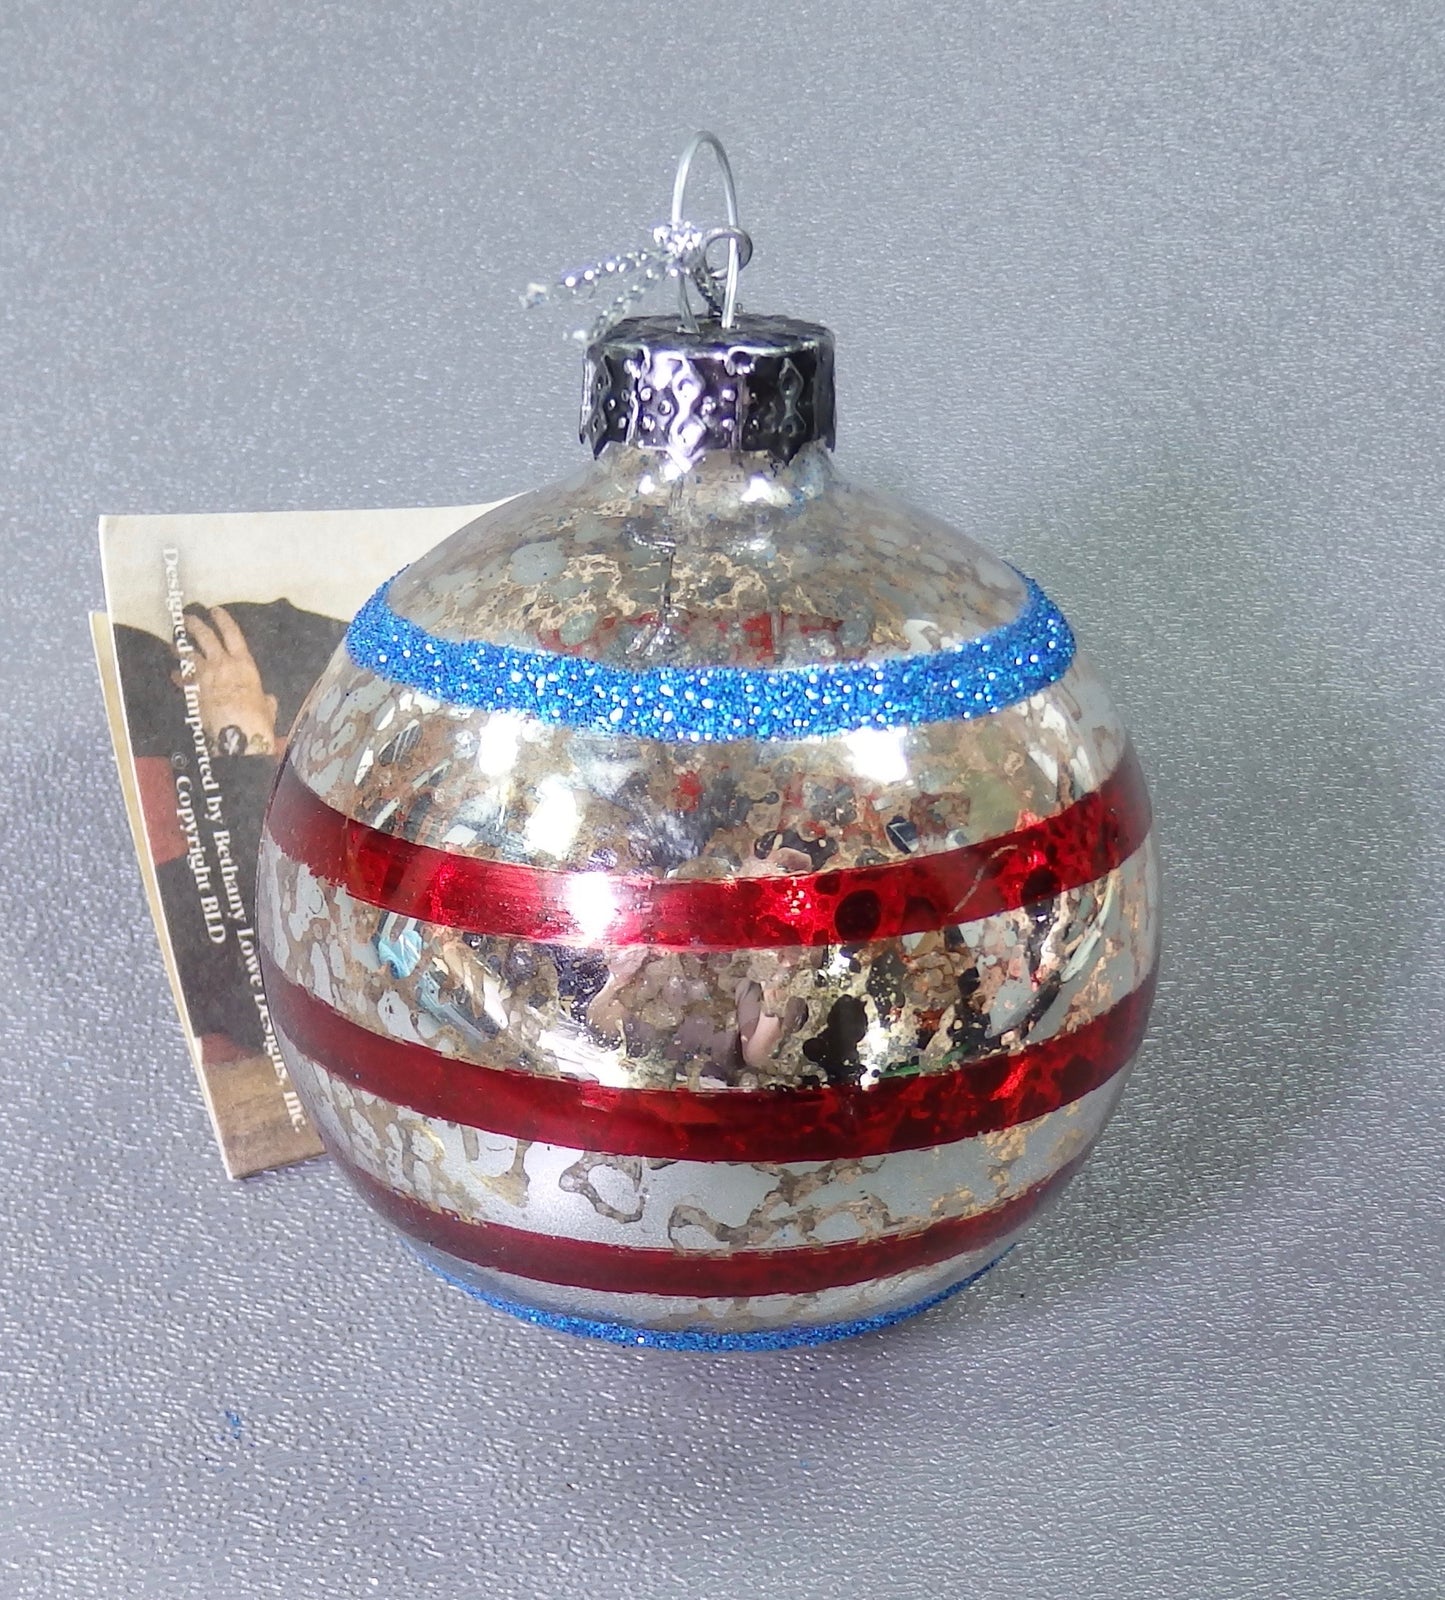 Bethany Lowe Americana Stripe Glass Ball Ornament Set of 3-Ornament-Oakview Collectibles